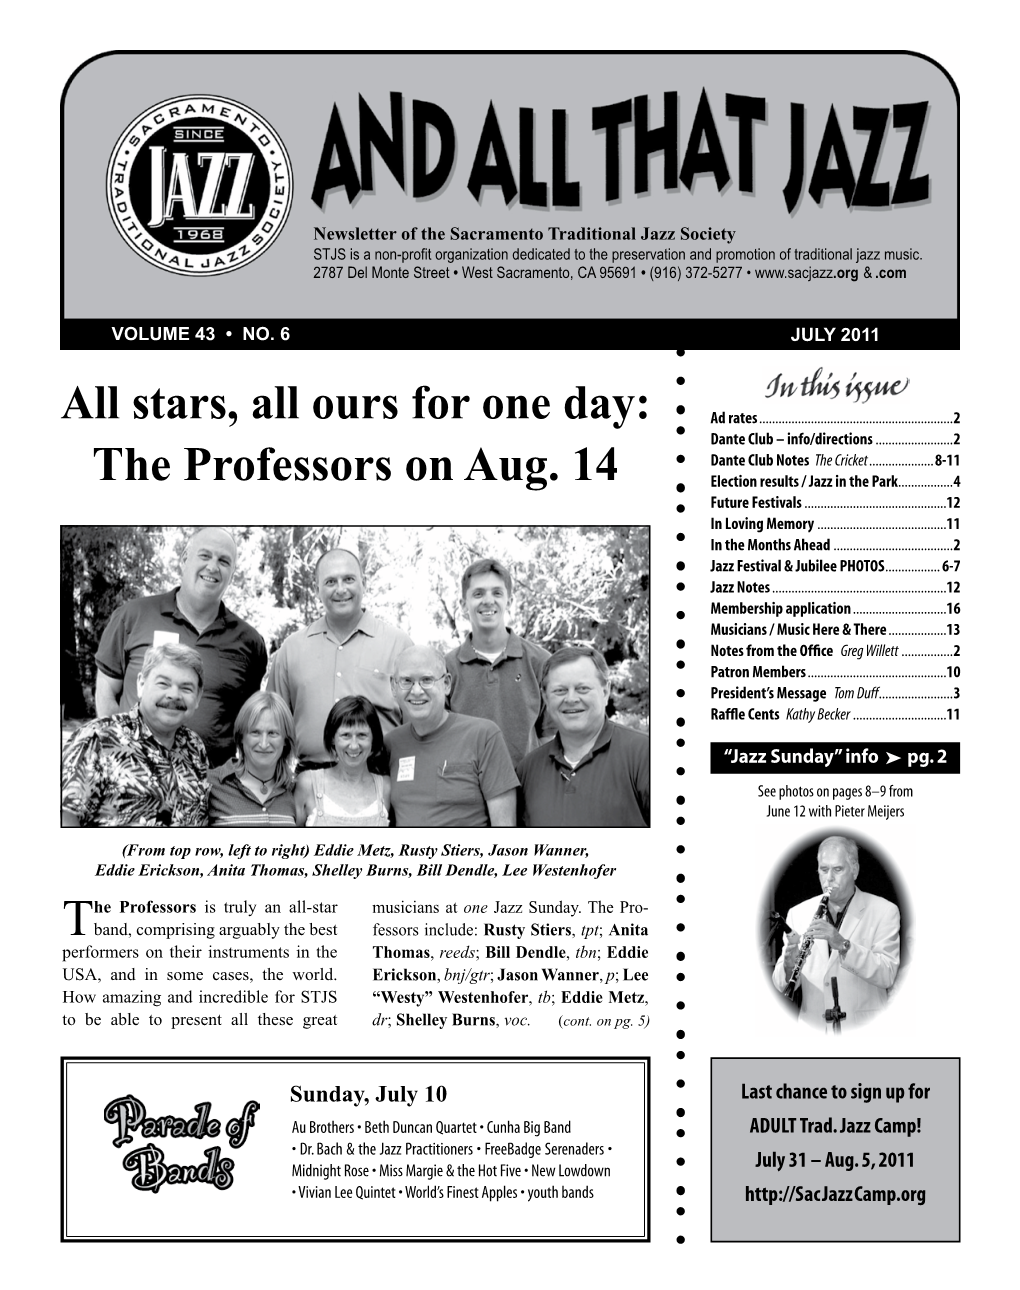 The Professors on Aug. 14 Election Results / Jazz in the Park